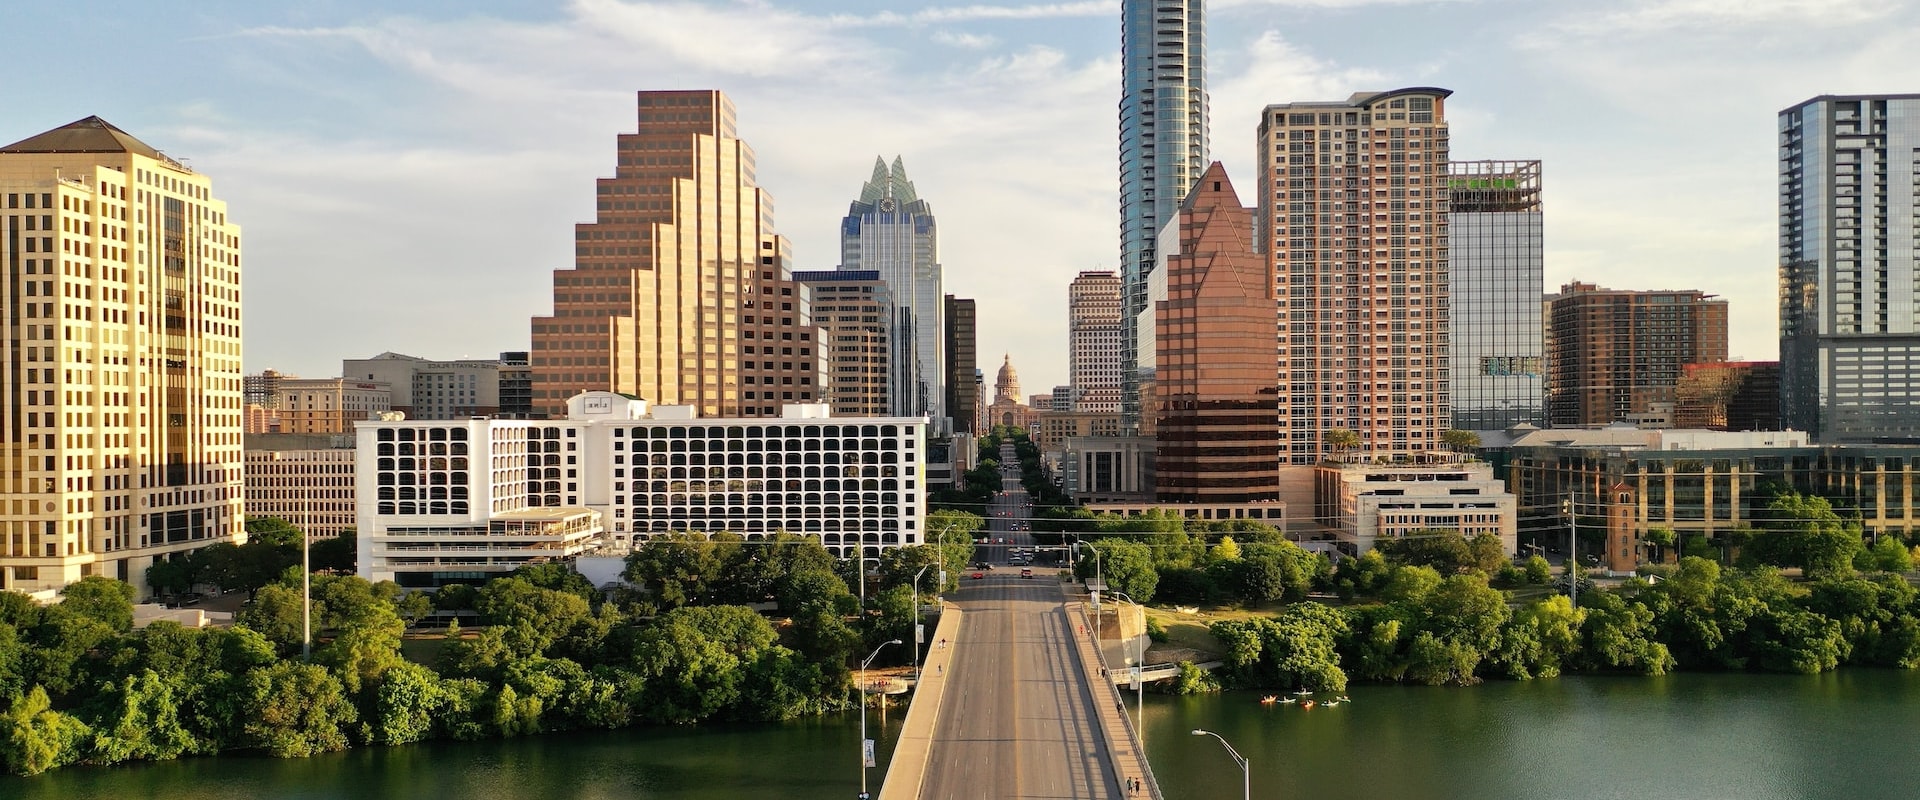 Finding An Investment Property In Austin: The Benefit Working With Commercial Real Estate Agency